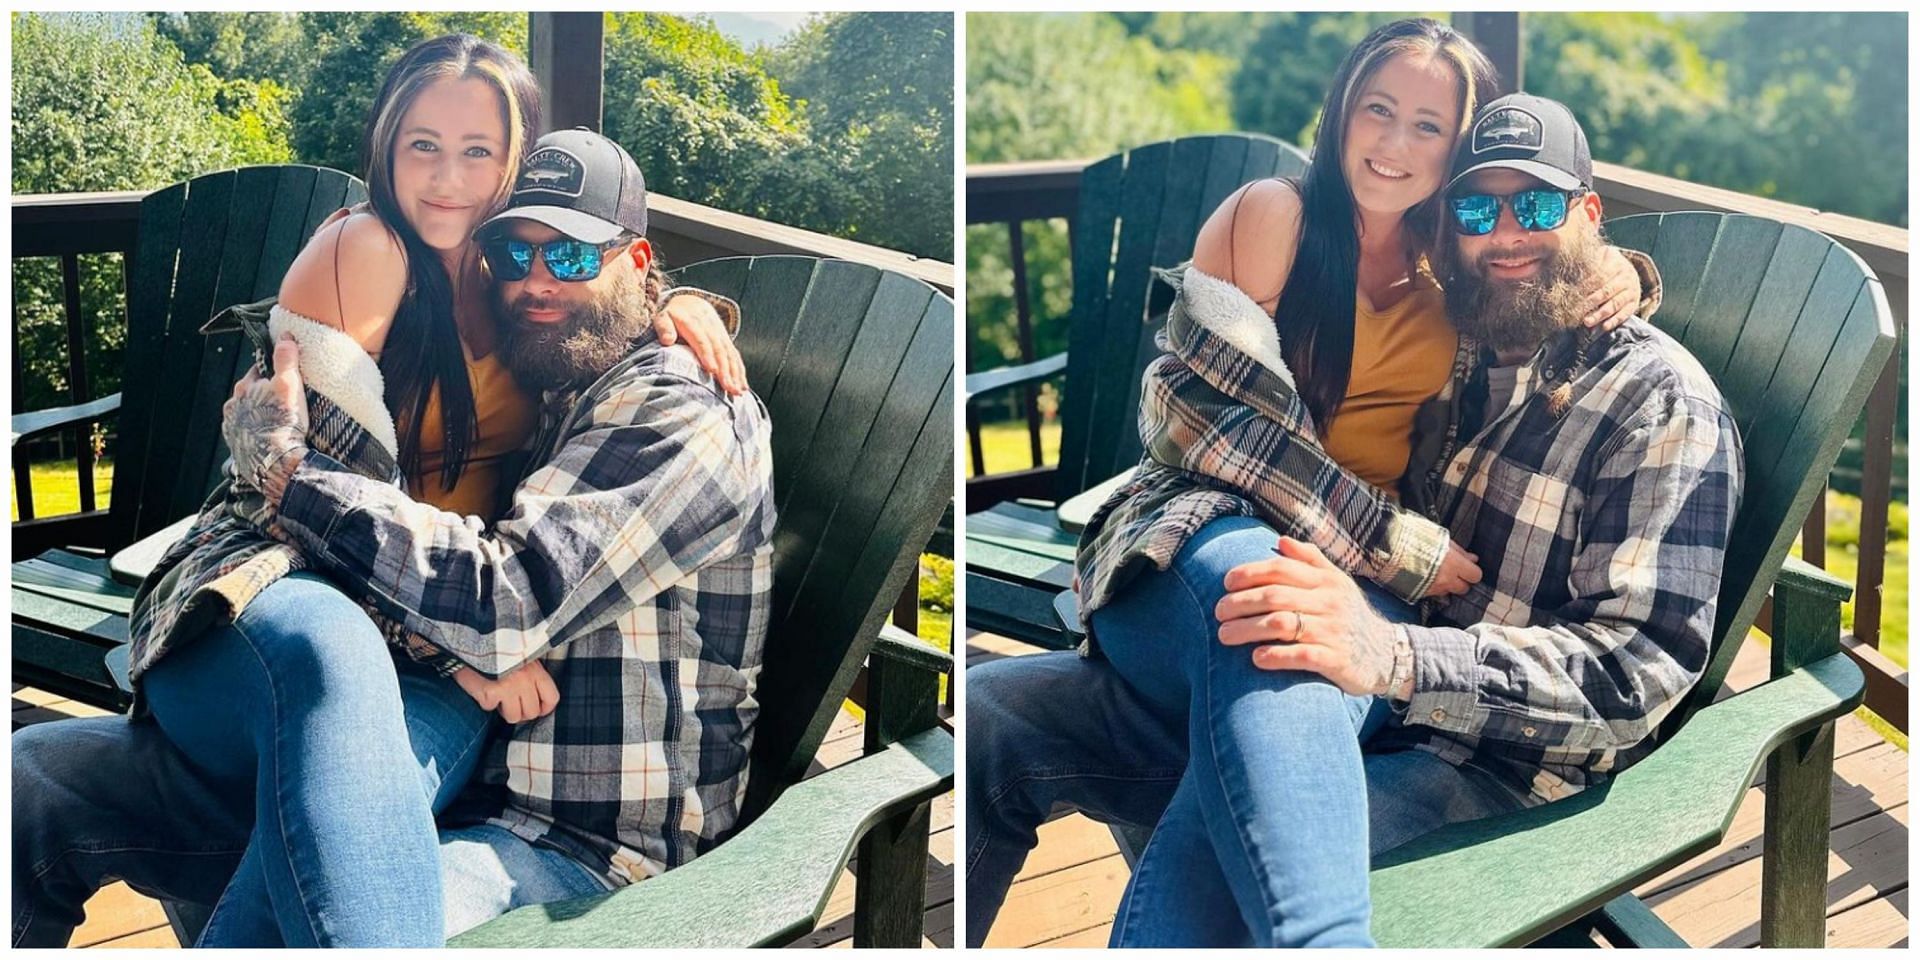 Jenelle Evans and David Eason part ways after 6 years of being married: Details revealed. (Image via @Jenelle Evans/ Instagram)